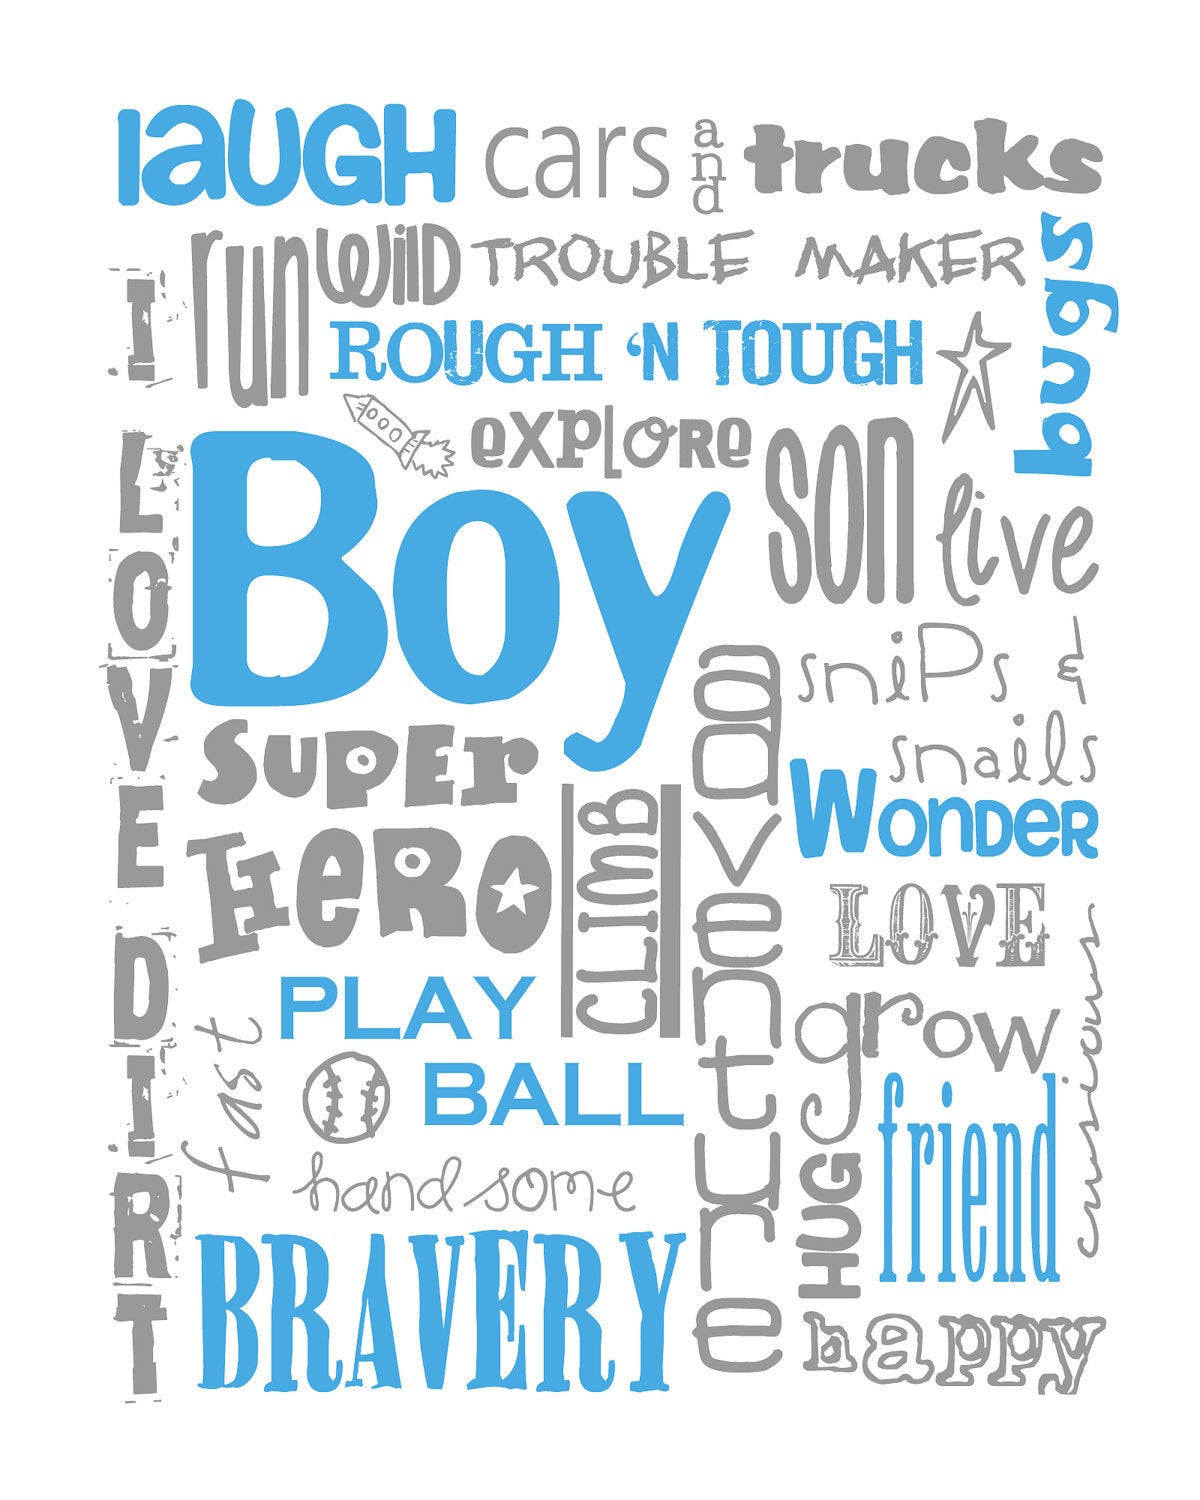 Expecting A Baby Boy Quotes
 Expecting A Baby Boy Quotes QuotesGram